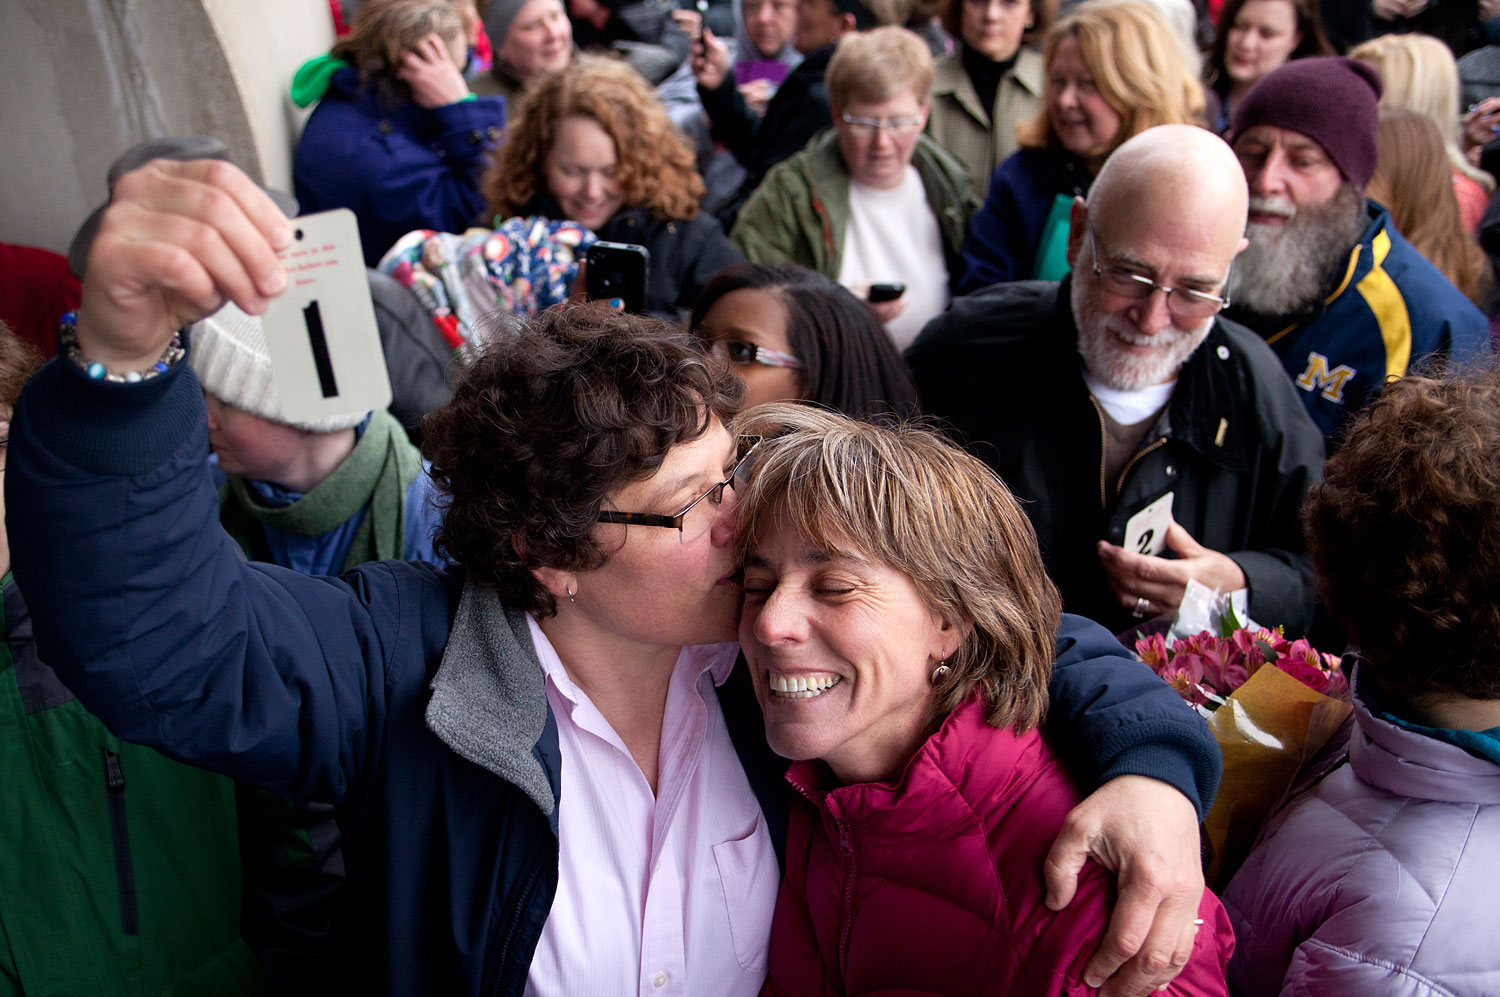 Elizabeth Patten, left, holds up the first marriage ticket to marry her partner Johnnie Terry in front of the Washtenaw County Clerks office in Ann Arbor, Mich., March 22, 2014, prior to the postponement of same-sex marriages by a federal appeals court. (Patrick Record—AP)